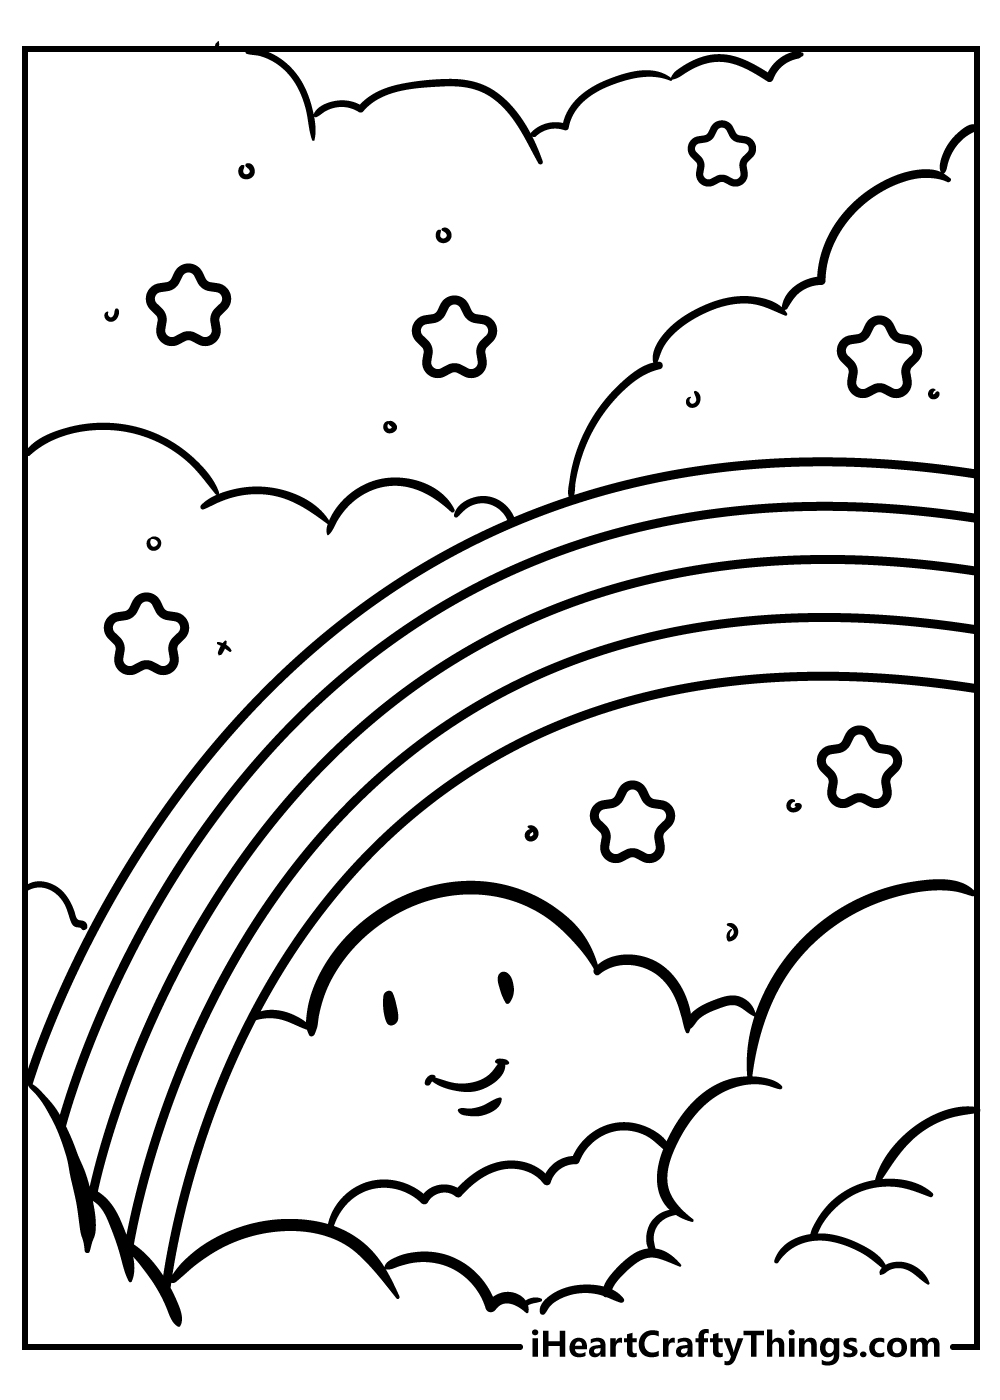 Rainbow Coloring Pages Updated 20